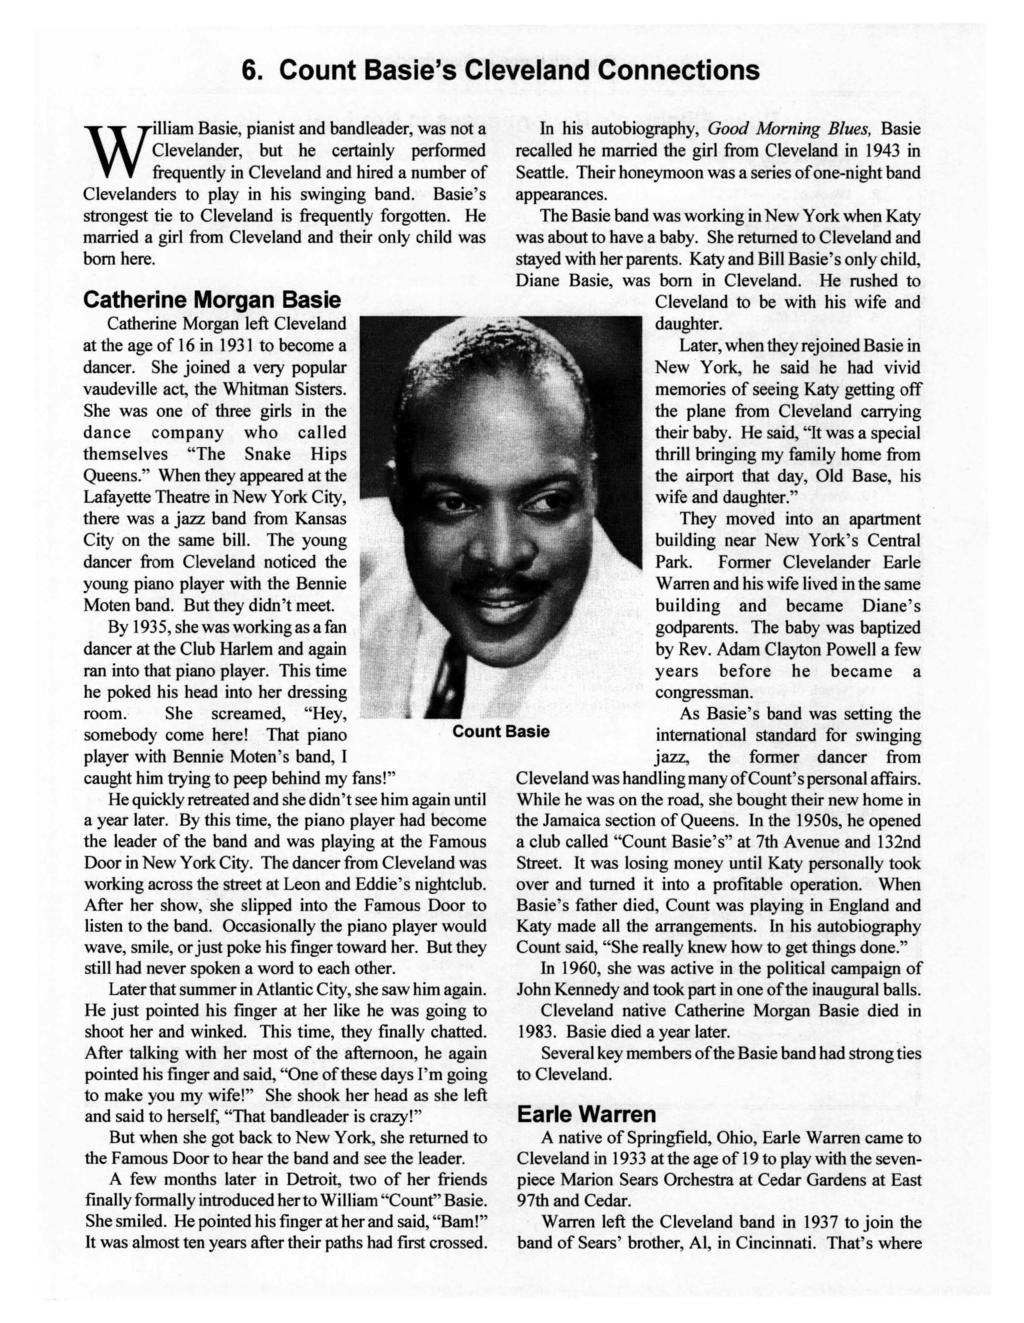 6. Count Basie's Cleveland Connections William Basie, pianist and bandleader, was not a Clevelander, but he certainly perfonned frequently in Cleveland and hired a number of Clevelanders to play in